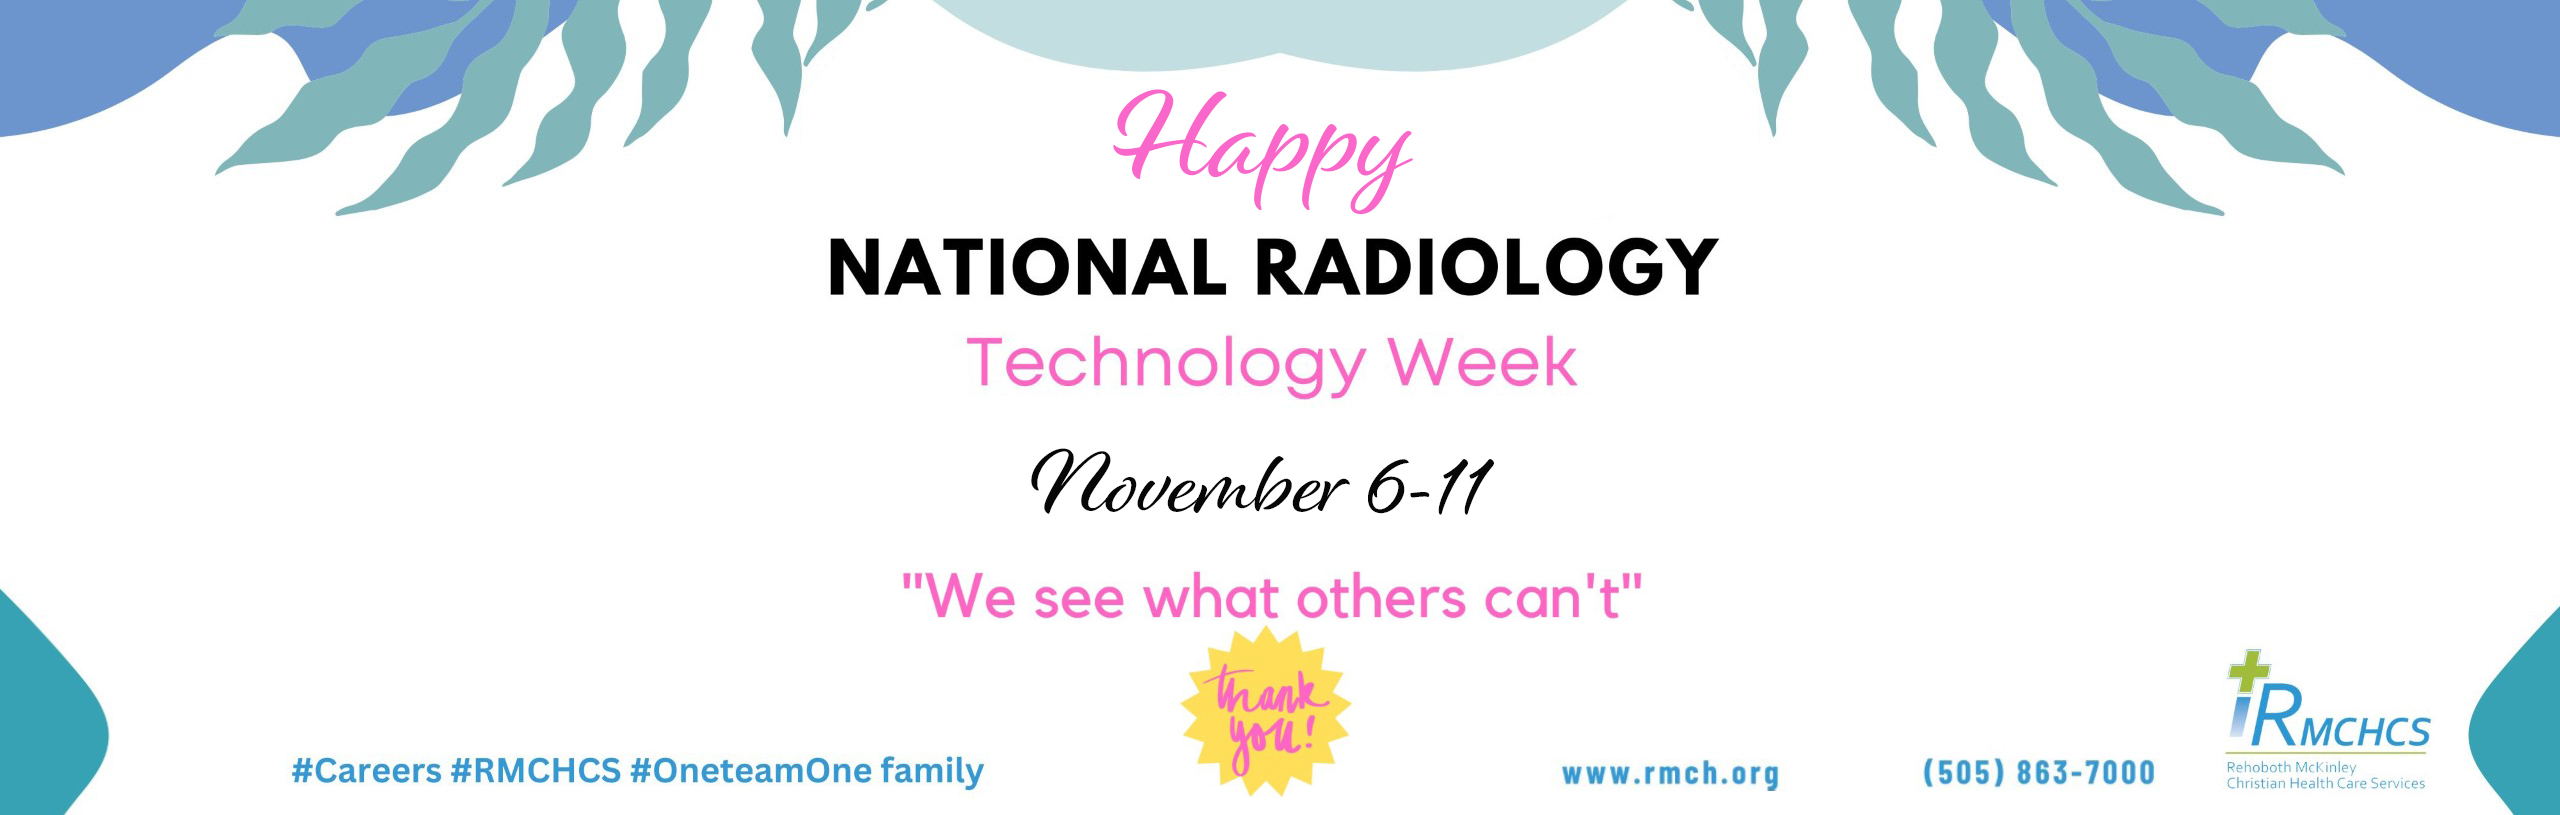 Happy NATIONAL RADIOLOGY Technology Week
November 6-11
"We see what others can't"

Thank You!

#Careers #RMCHCS #OneteamOnefamily

www.rmch.org
(505) 863-7000
RMCHCS